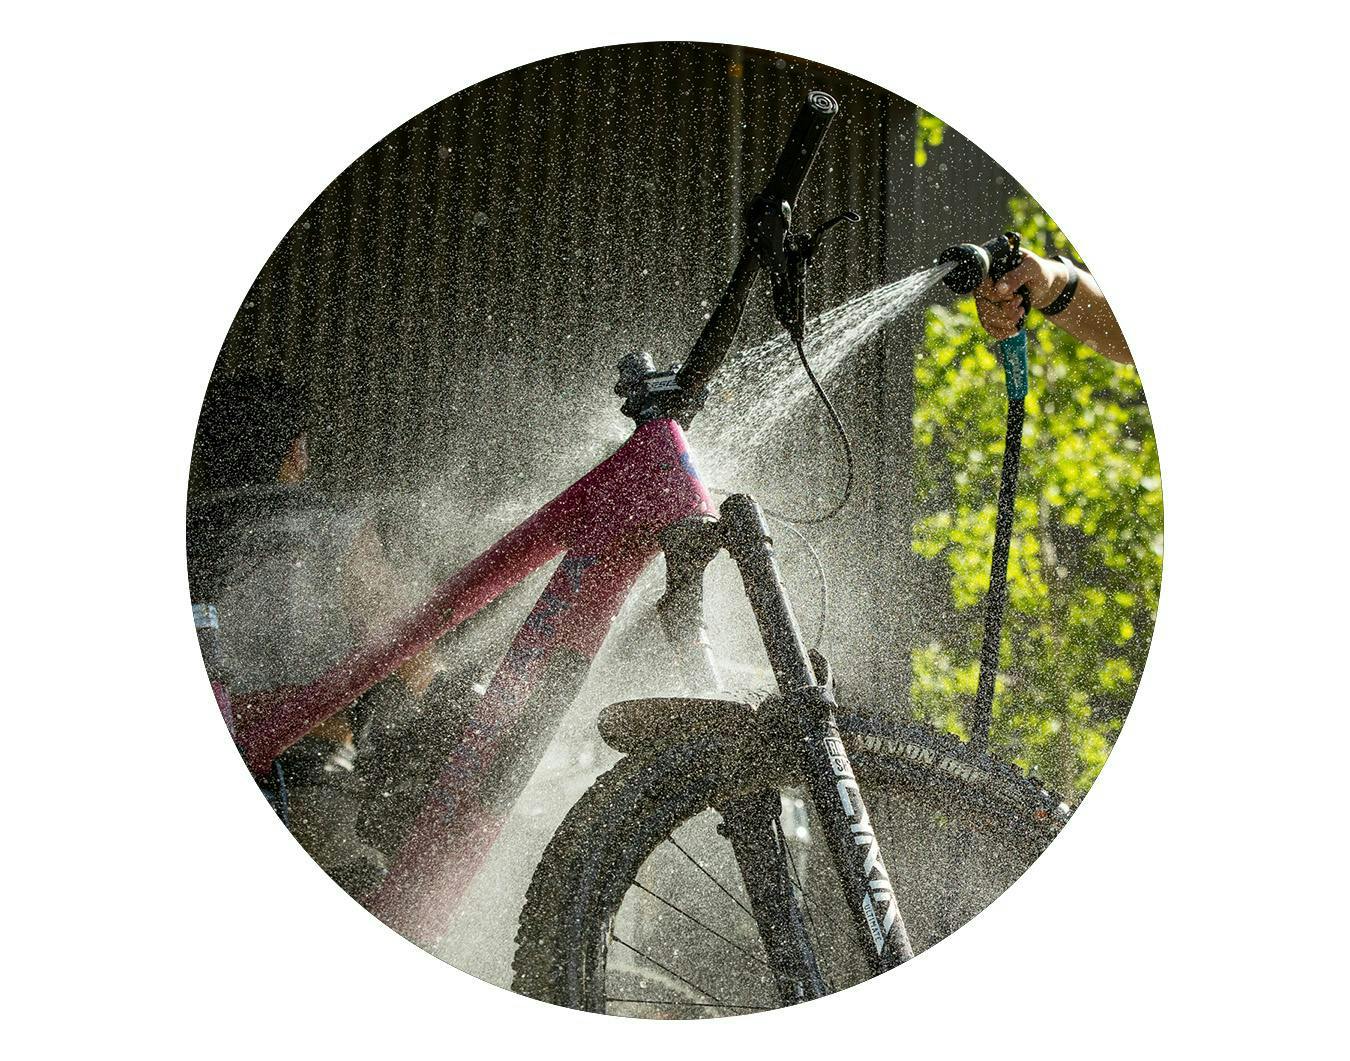 A circular image of someone cleaning their Juliana Bicycles Roubion with a hose and spray nozzle